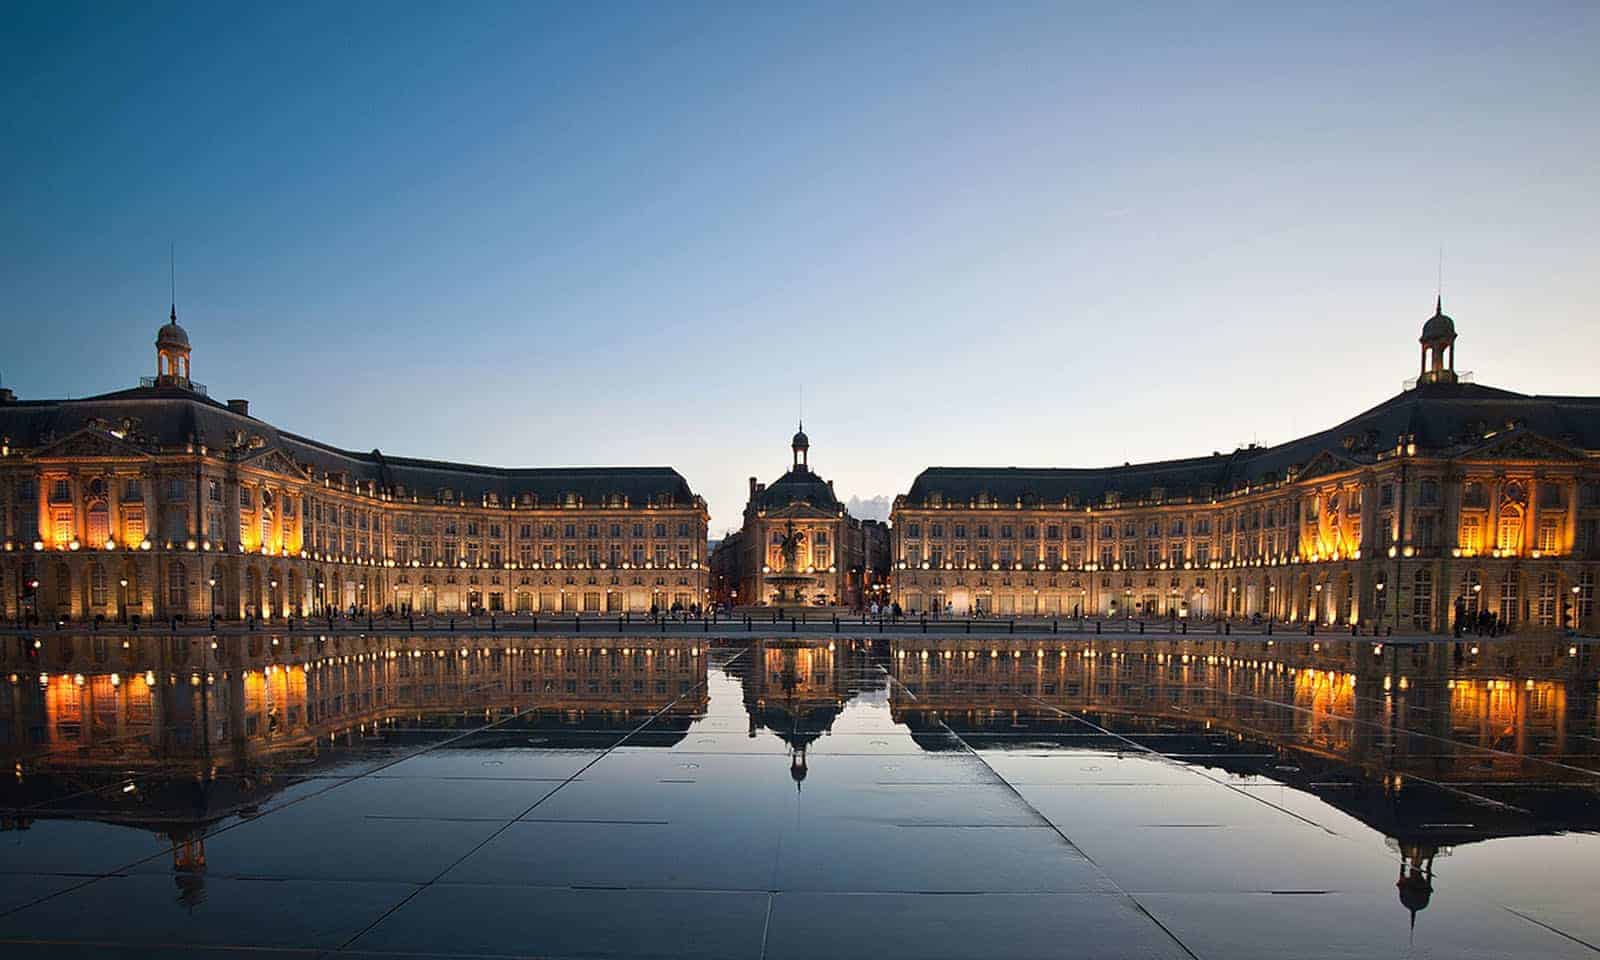 Please join me on an Unforgettable Trip to Bordeaux May 4 th to May 11 th 2020 with Tour de Forks